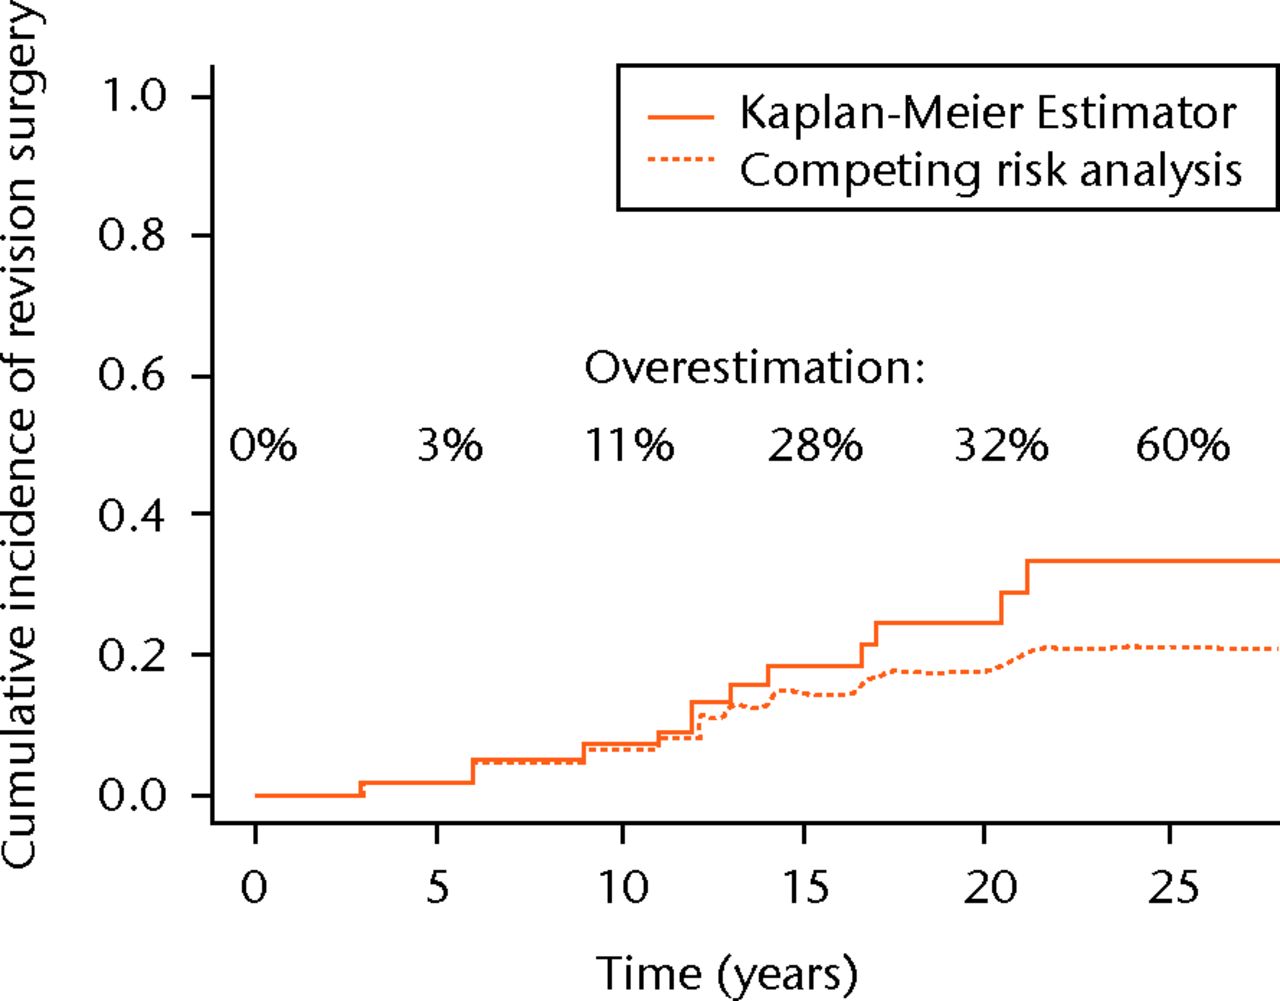 Fig. 3 
          Comparison of cumulative incidence of
revision surgery estimated with the Kaplan-Meier estimator and the
competing risks method. The discrepancy between the lines represents
the bias, which is introduced by erroneous usage of the Kaplan-Meier estimator.
        